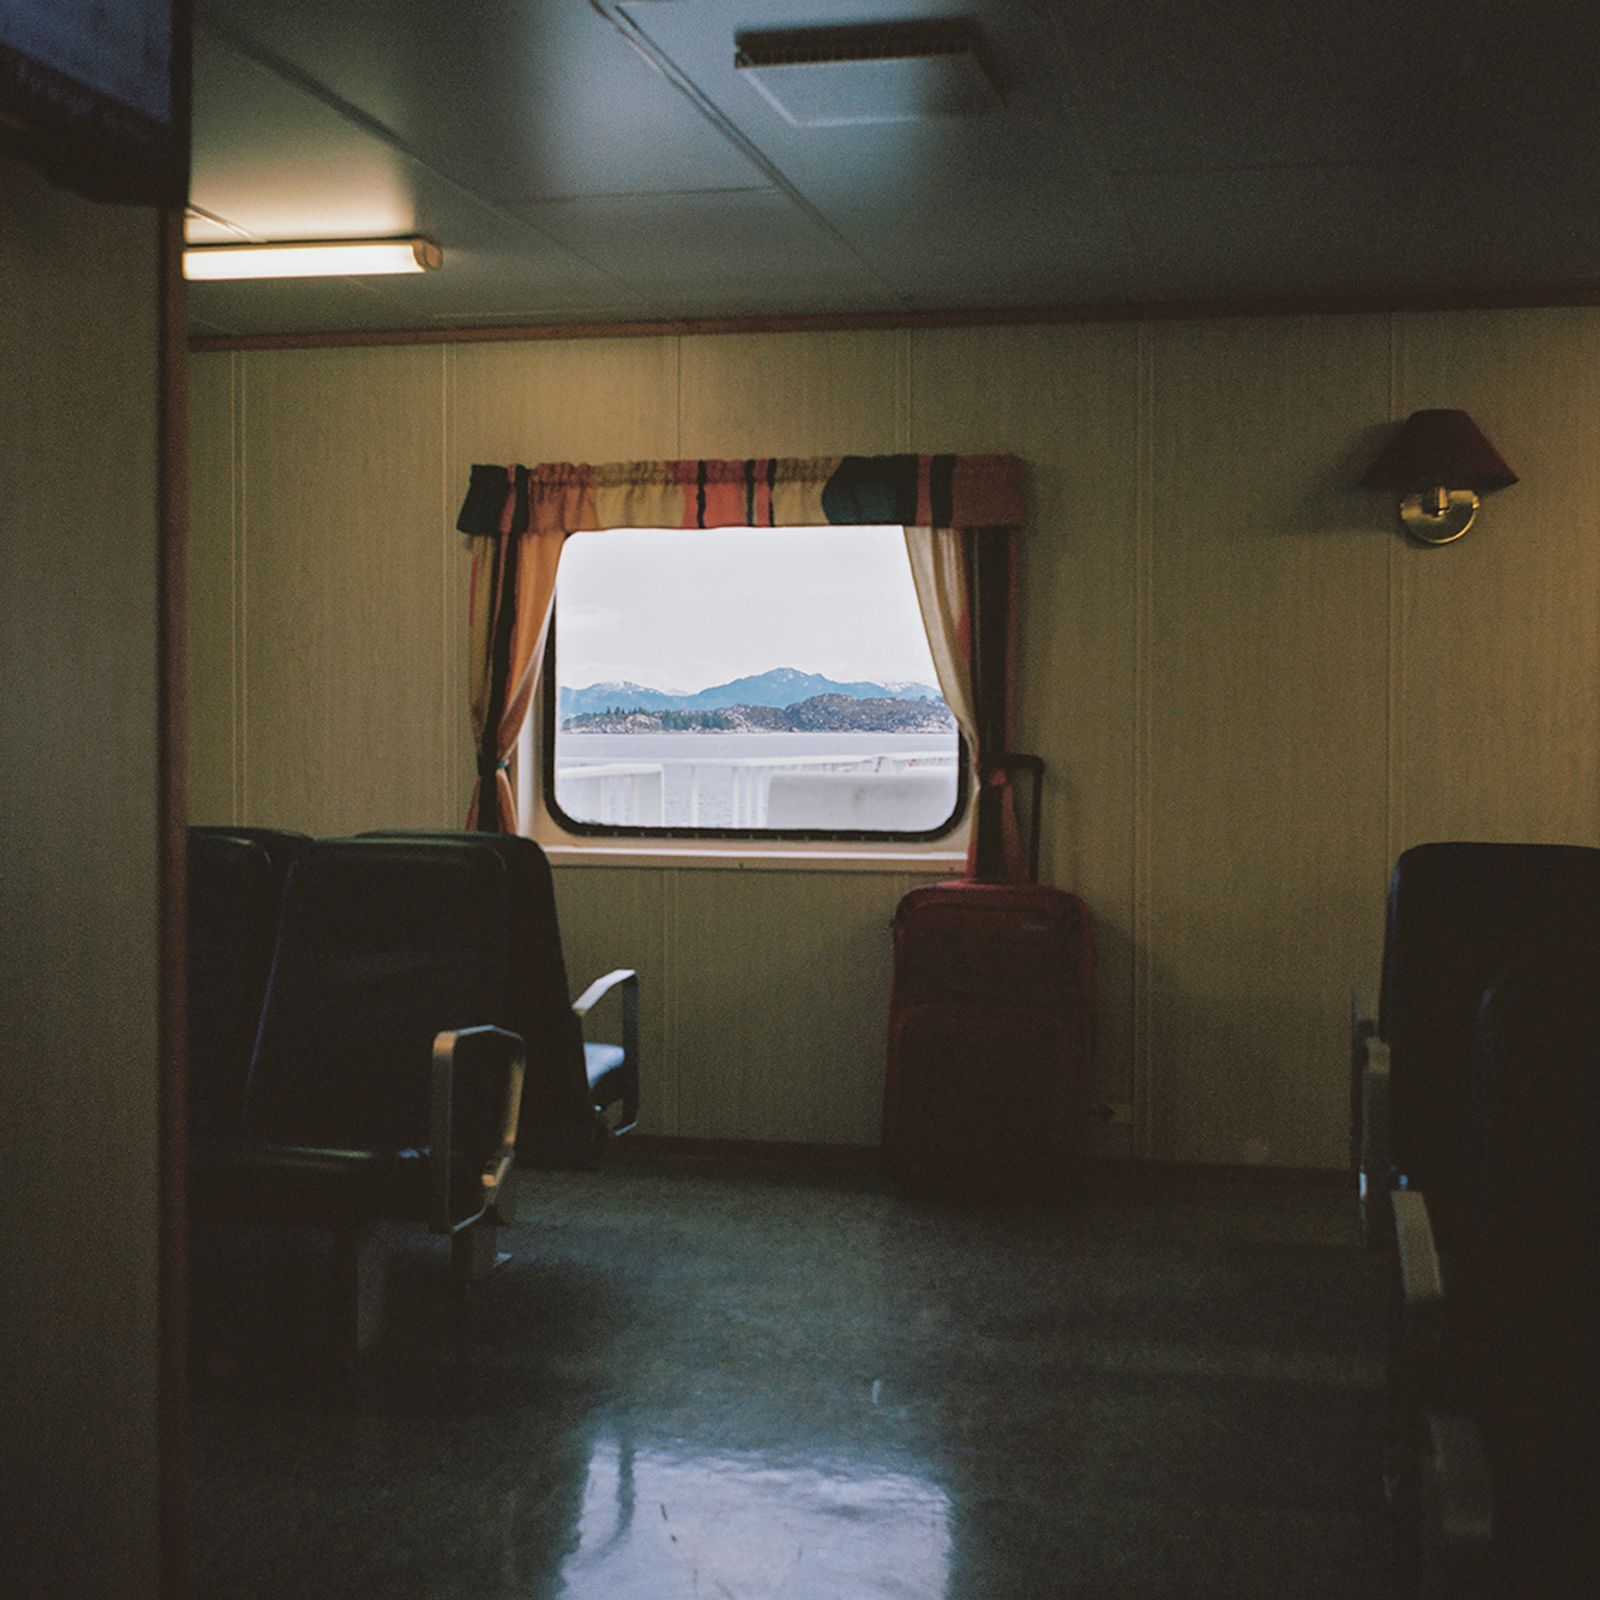 © Mirjam Stenevik - A tired suitcase takes the old ferry one last time, before it's being replaced with a new electrical model.